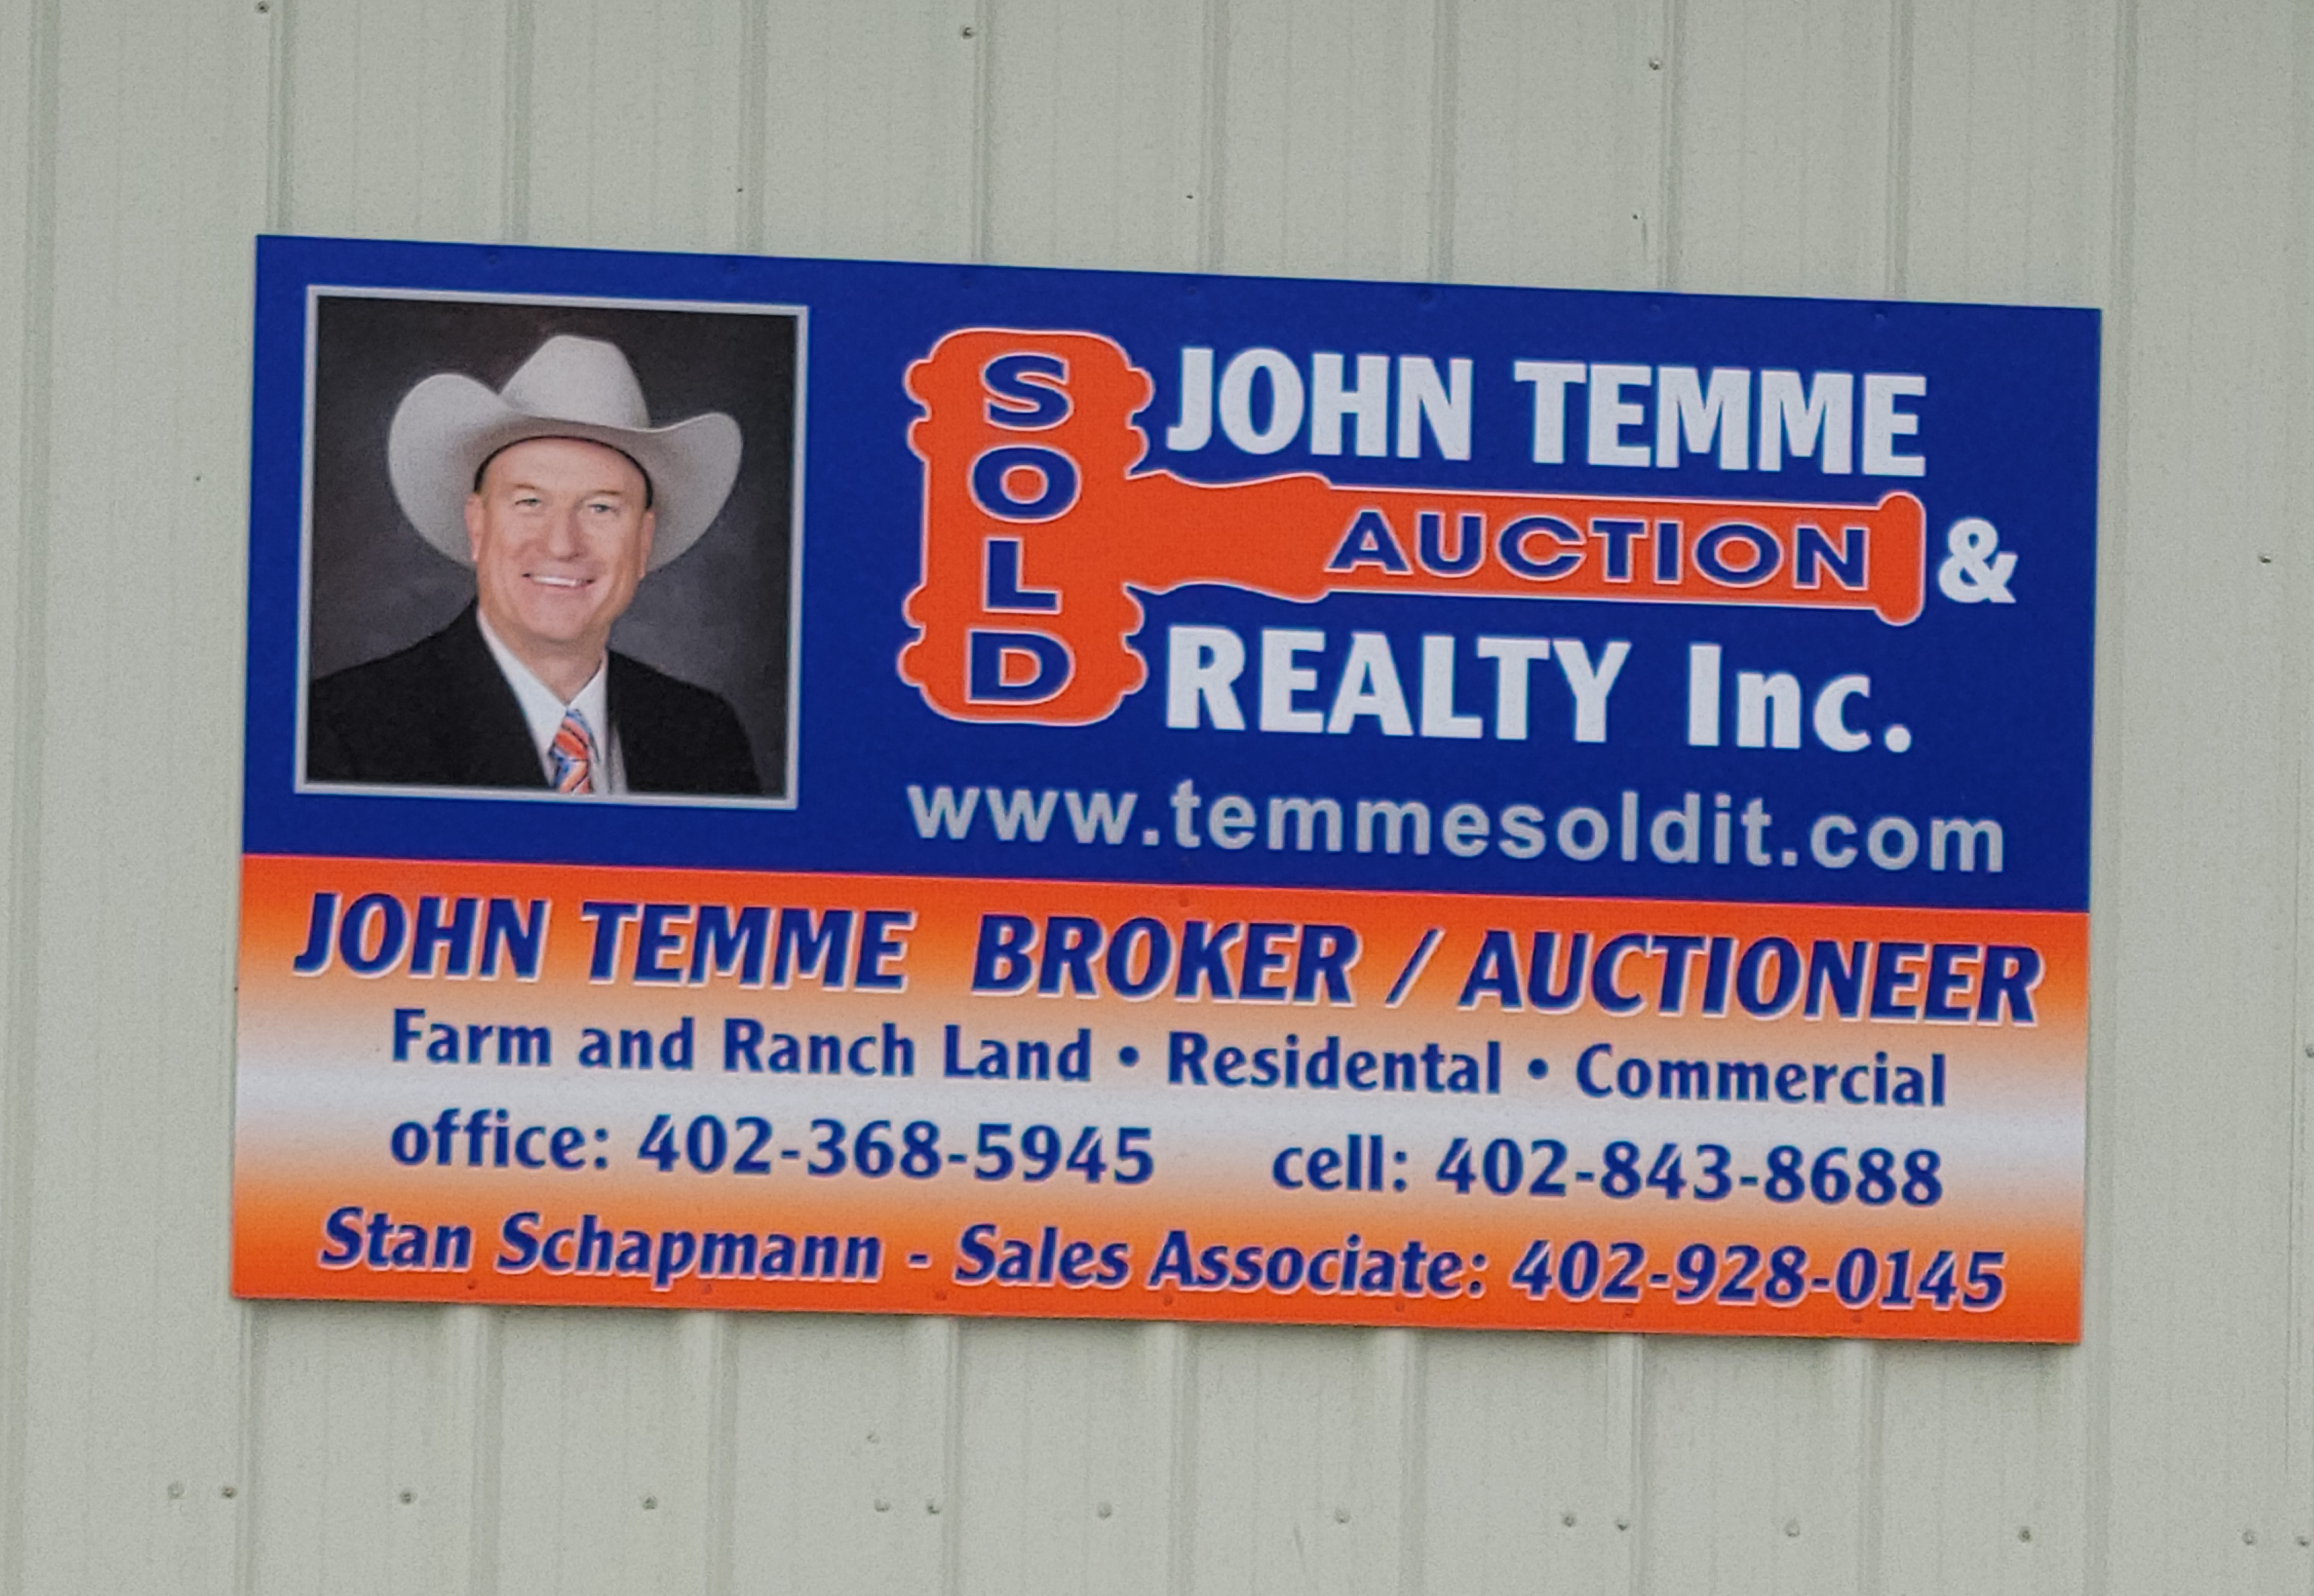 John Temme Auction & Real Estate - Stan Schapmann other businesses in Norfolk photo